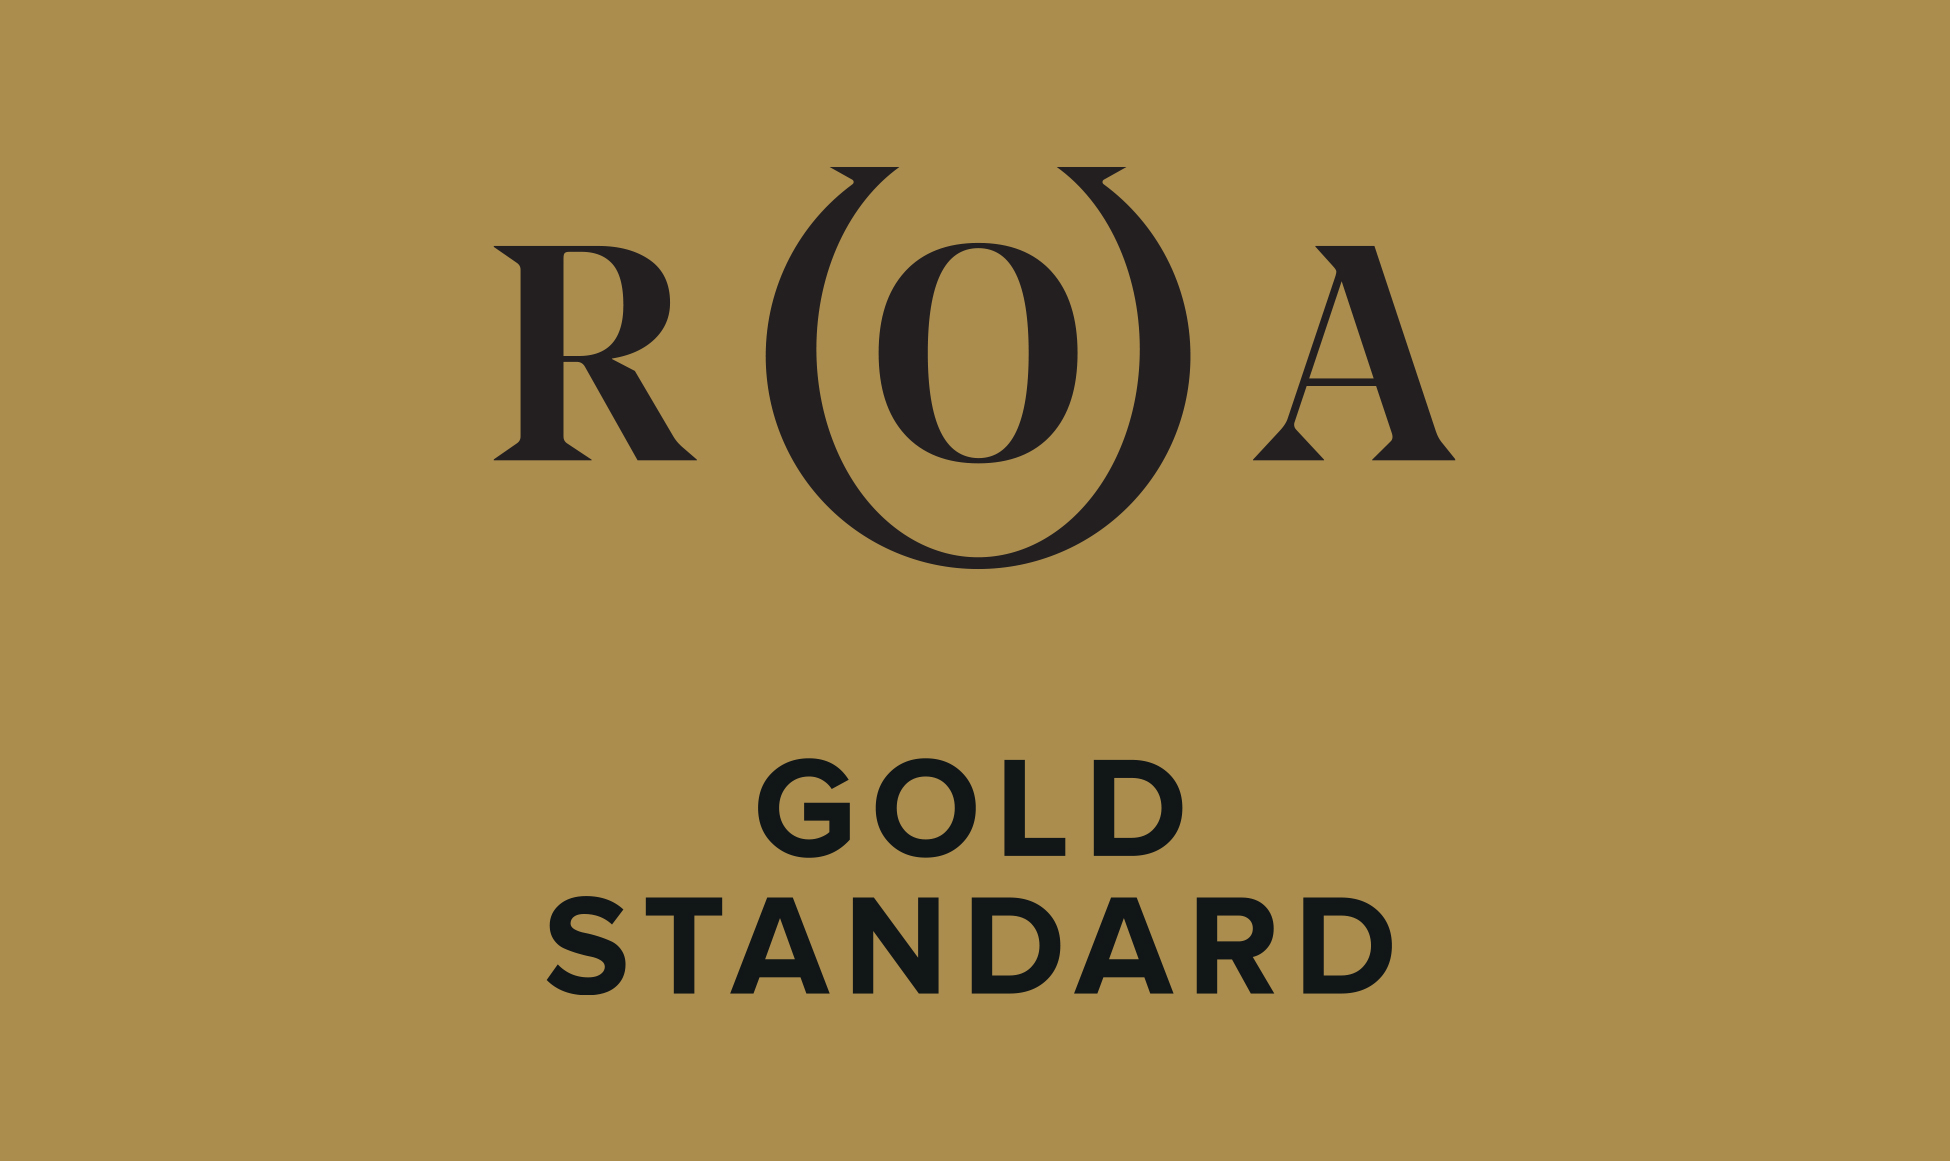 Bangor-on-Dee Racecourse Awarded 2022 Gold Standard Status by the ROA thumbnail image